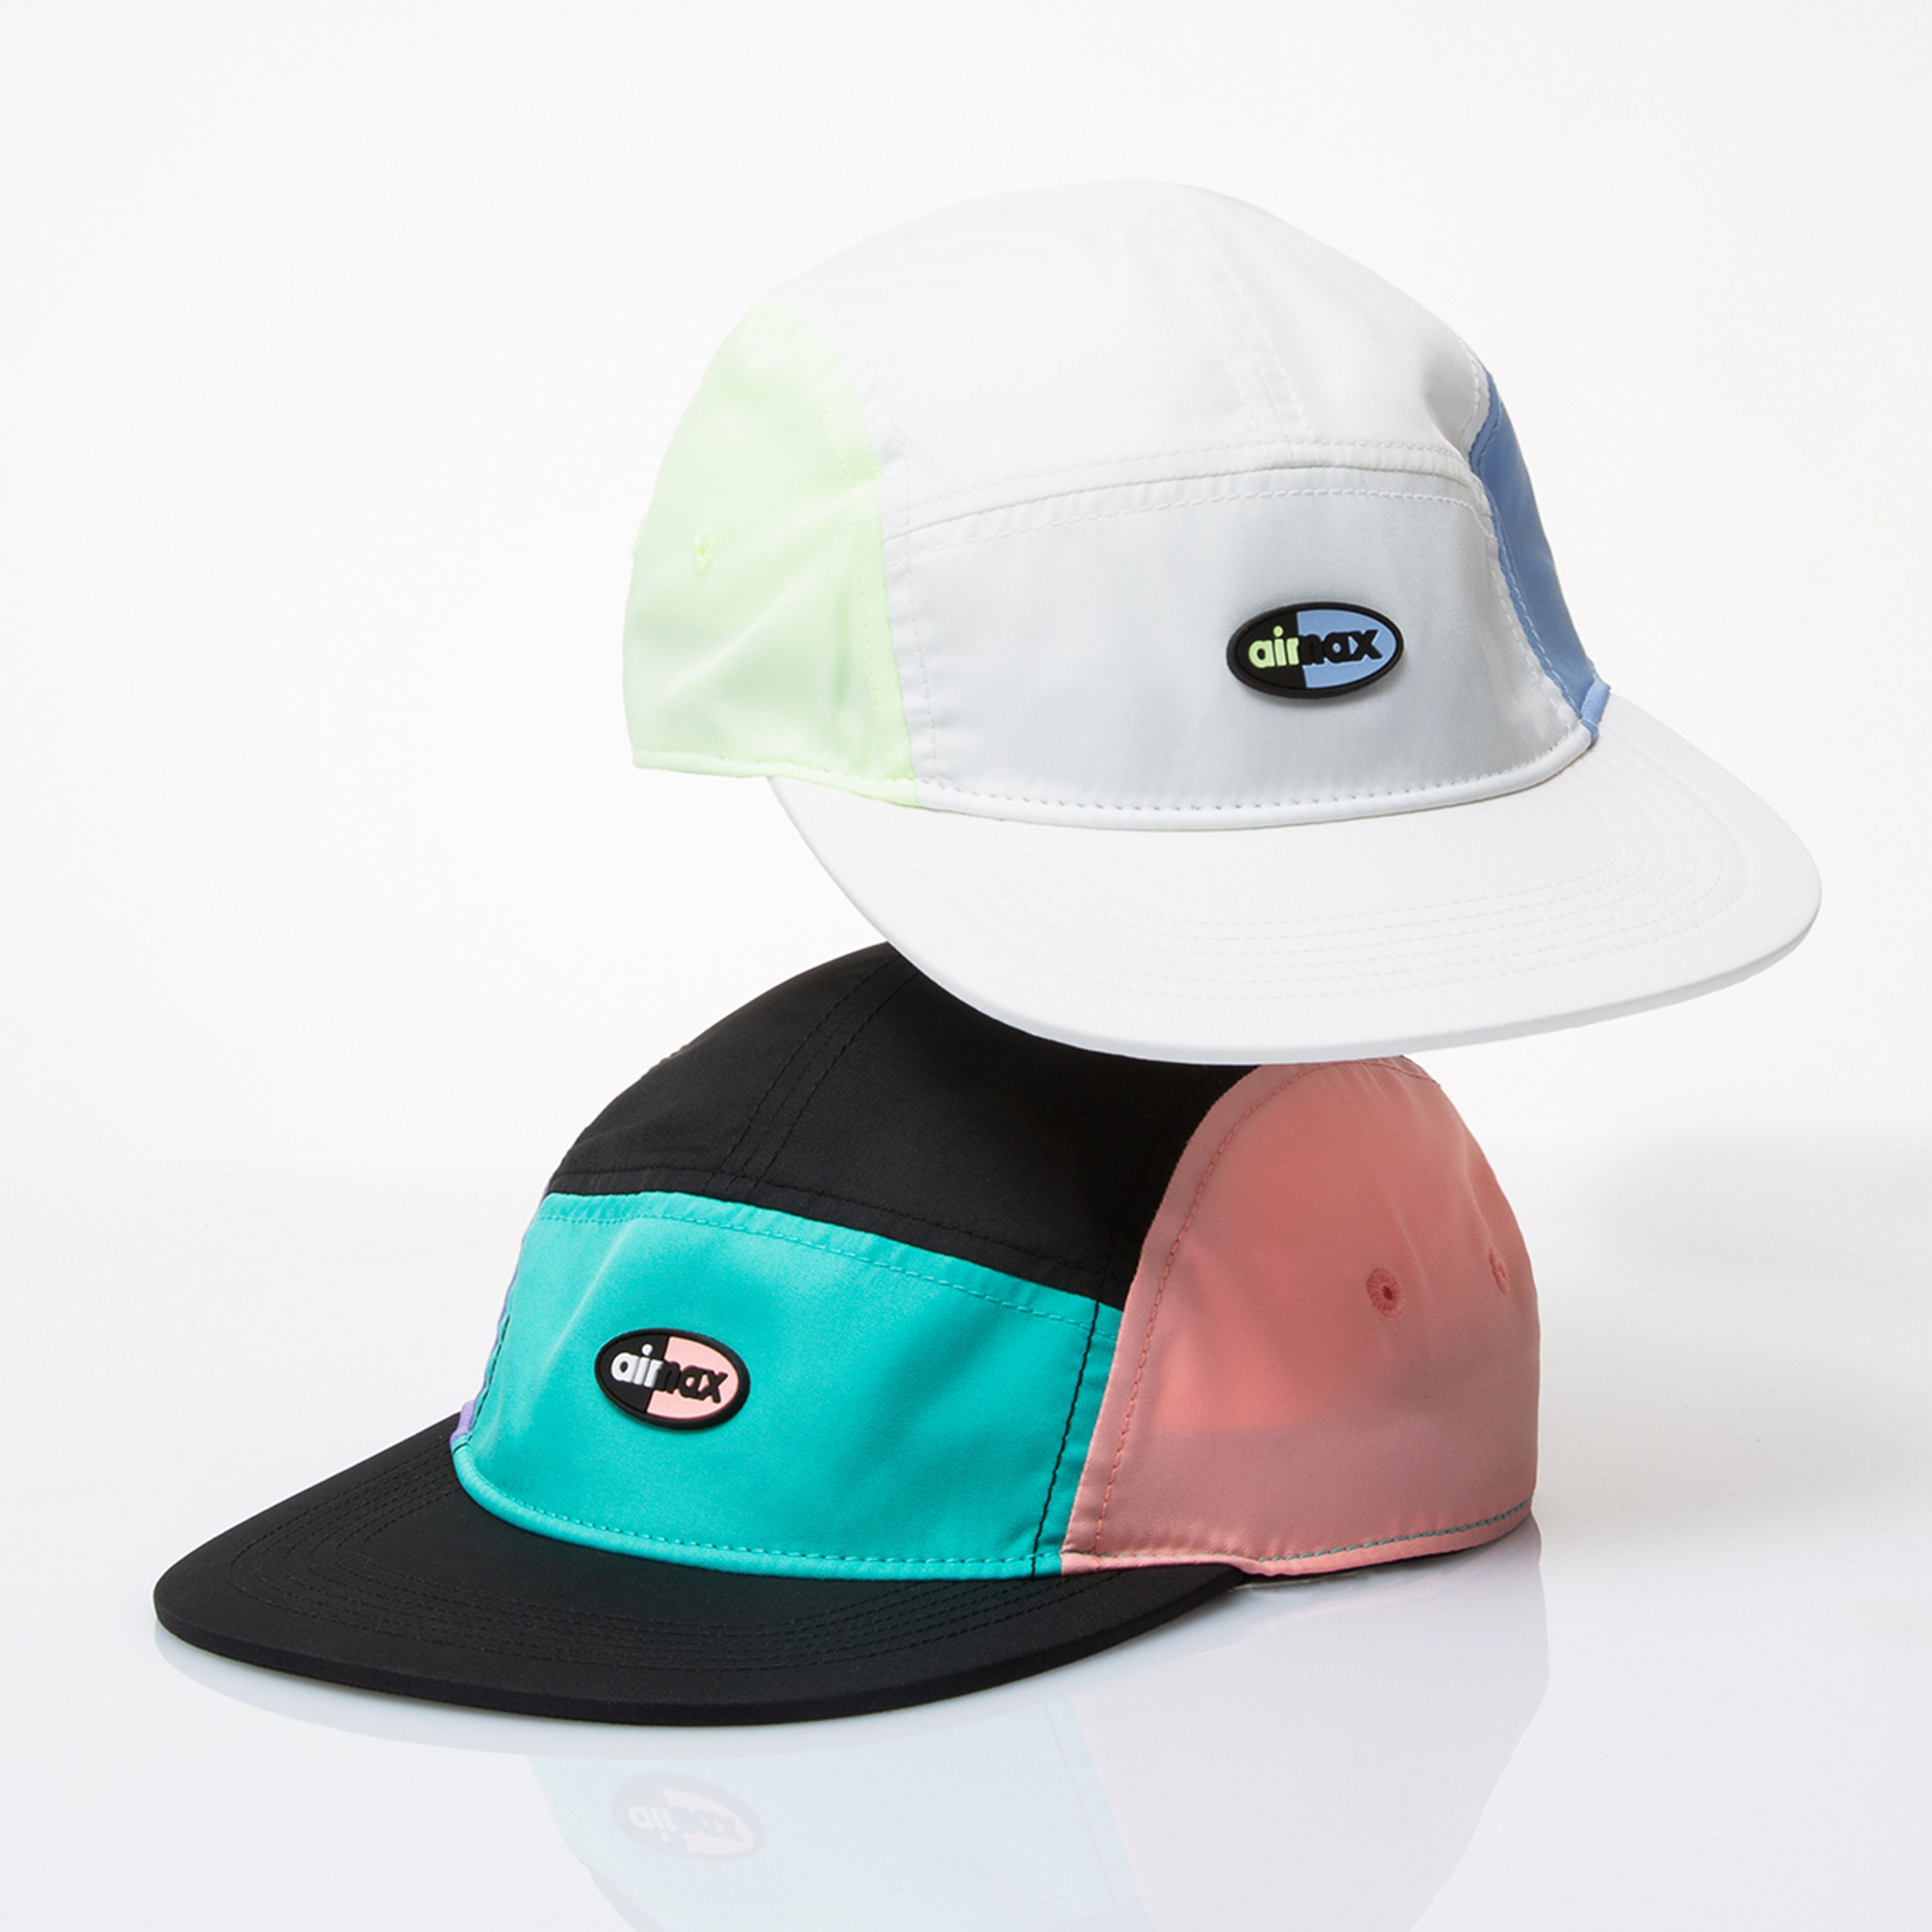 Titolo on Twitter: 🔜 Nike Arobill Aw84 Cap Air Max Black/Hyper Jade/Bleached Coral White/Aluminum/Barely Volt drop today Friday, 1st March online 9AM CET. link ➡️ https://t.co/9qHFjqG9Av size. style